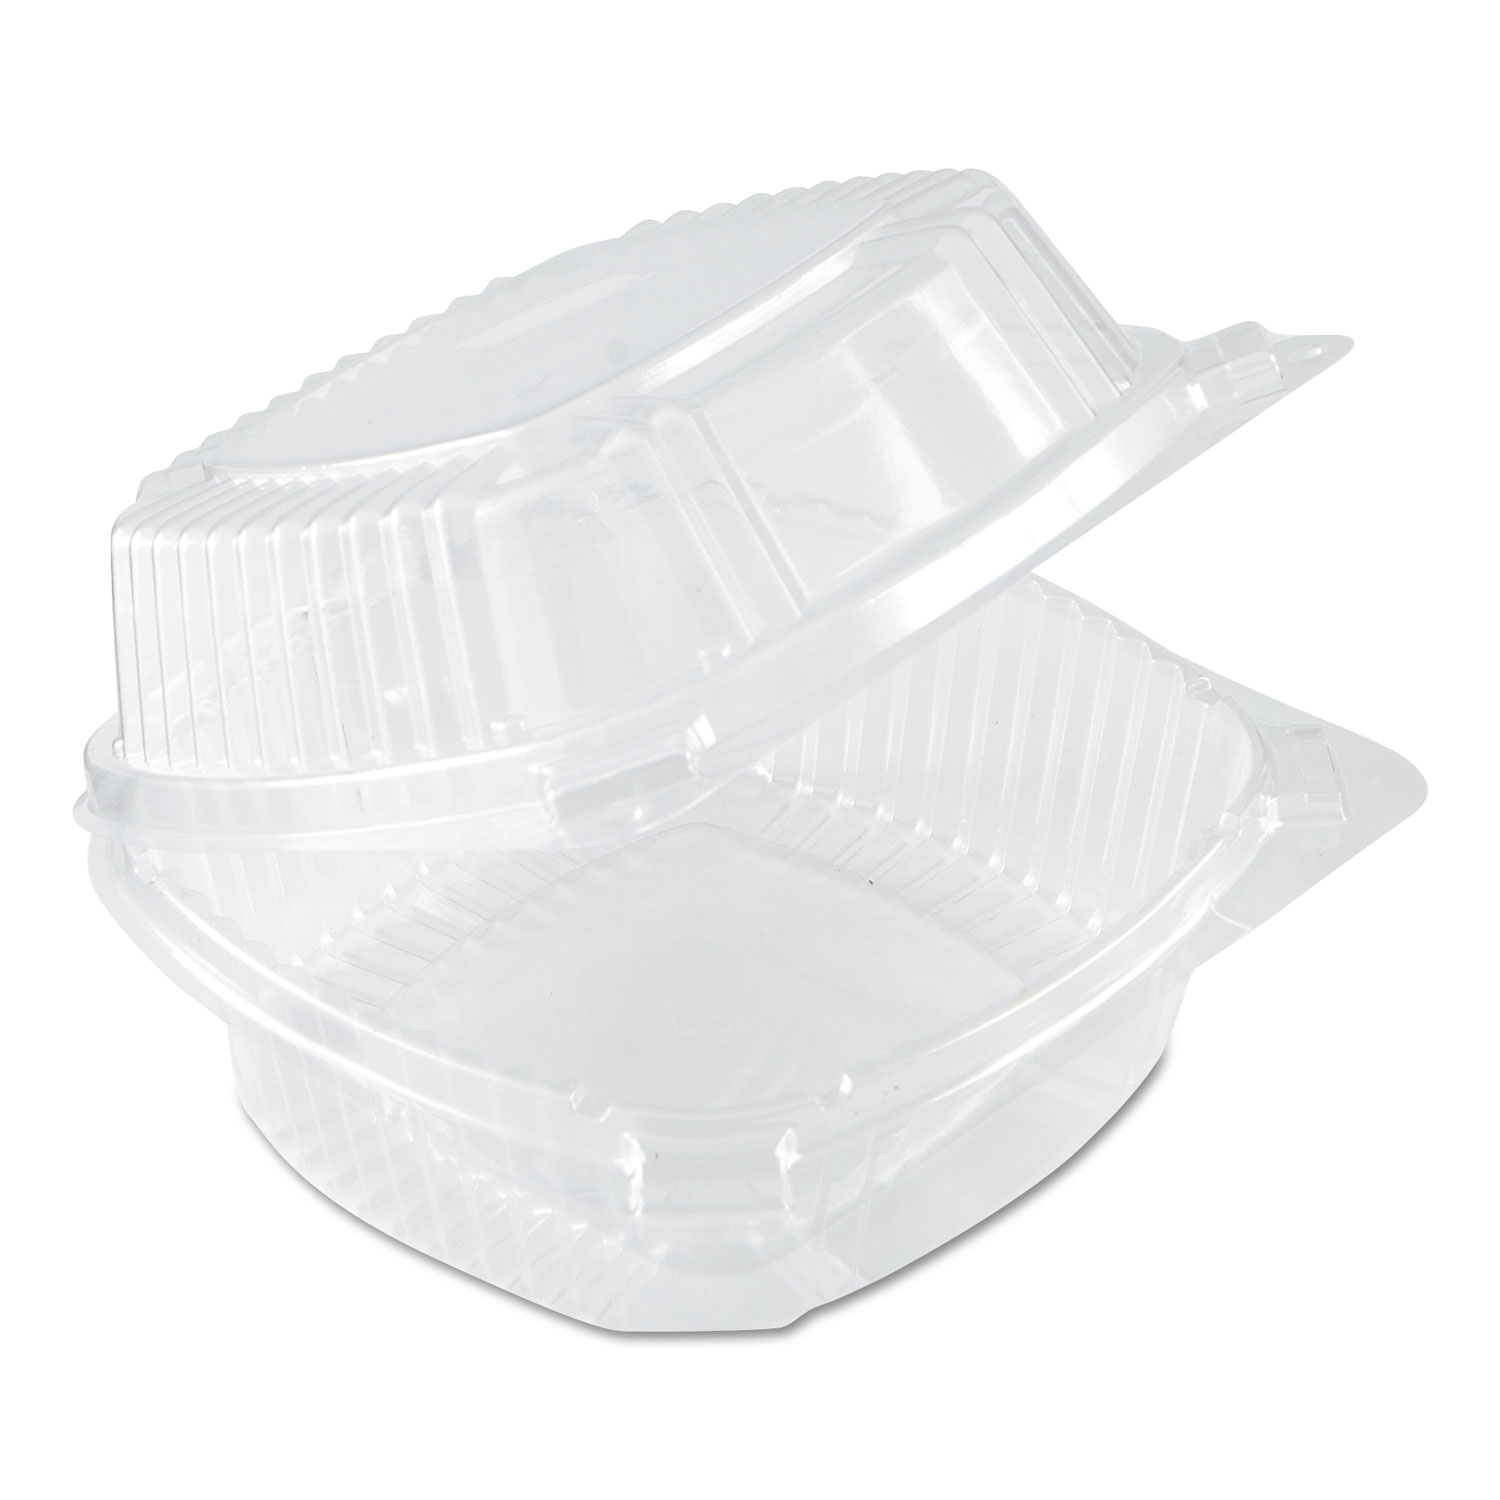 SmartLock Food Containers, Clear, 20oz, 5 3/4w x 6d x 3h, 500/Carton